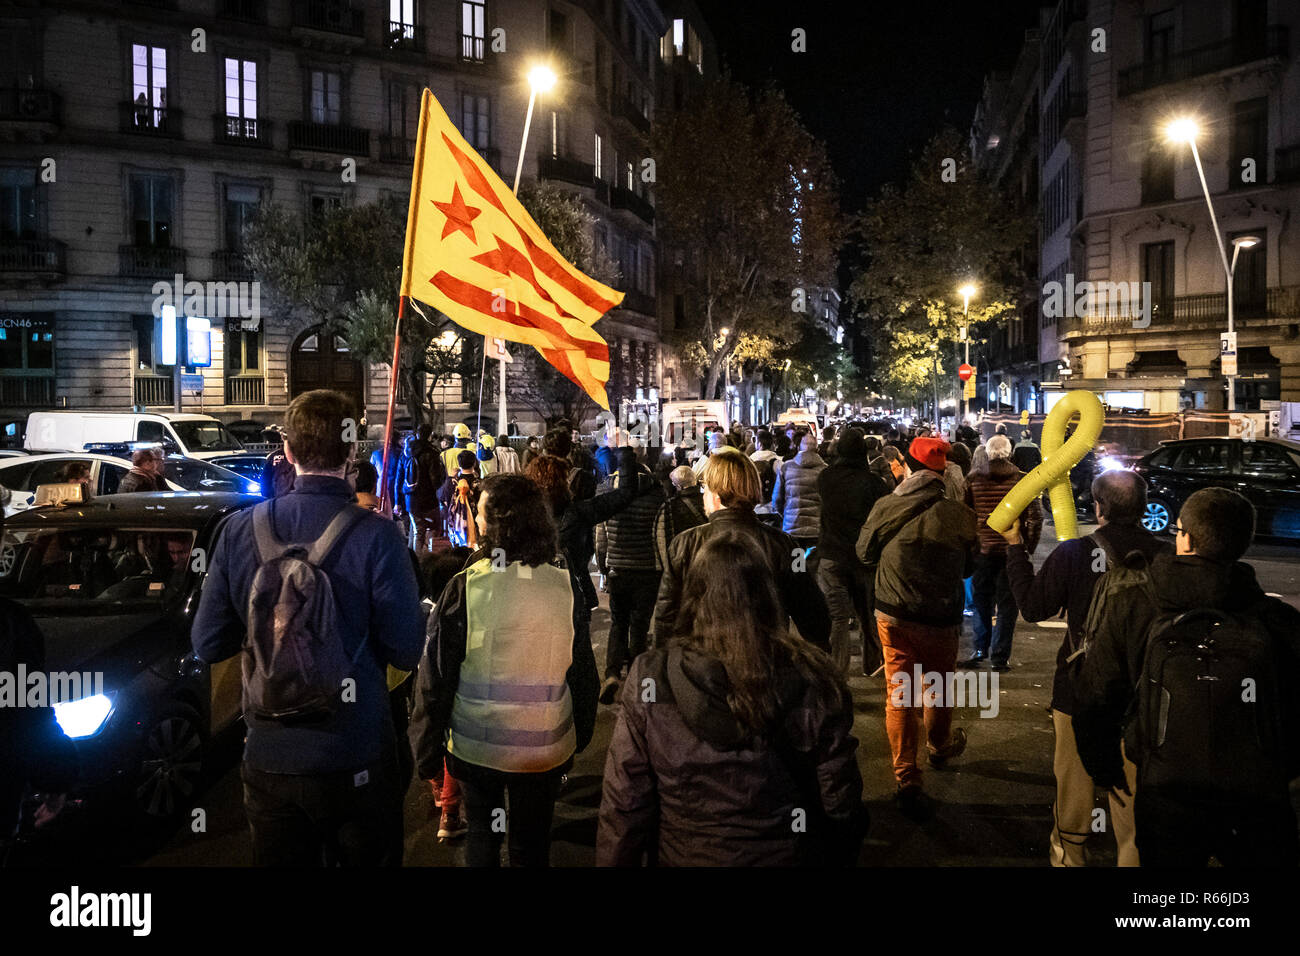 Pro Catalonia independence demonstrators seen blocking traffics during the demonstration. Demonstrators took to the street of Barcelona in solidarity with the four political prisoners (Joaquín Form, Jordi Sànchez, Josep Rull and Jordi Turull) in prison who have begun an indefinite hunger strike. Stock Photo